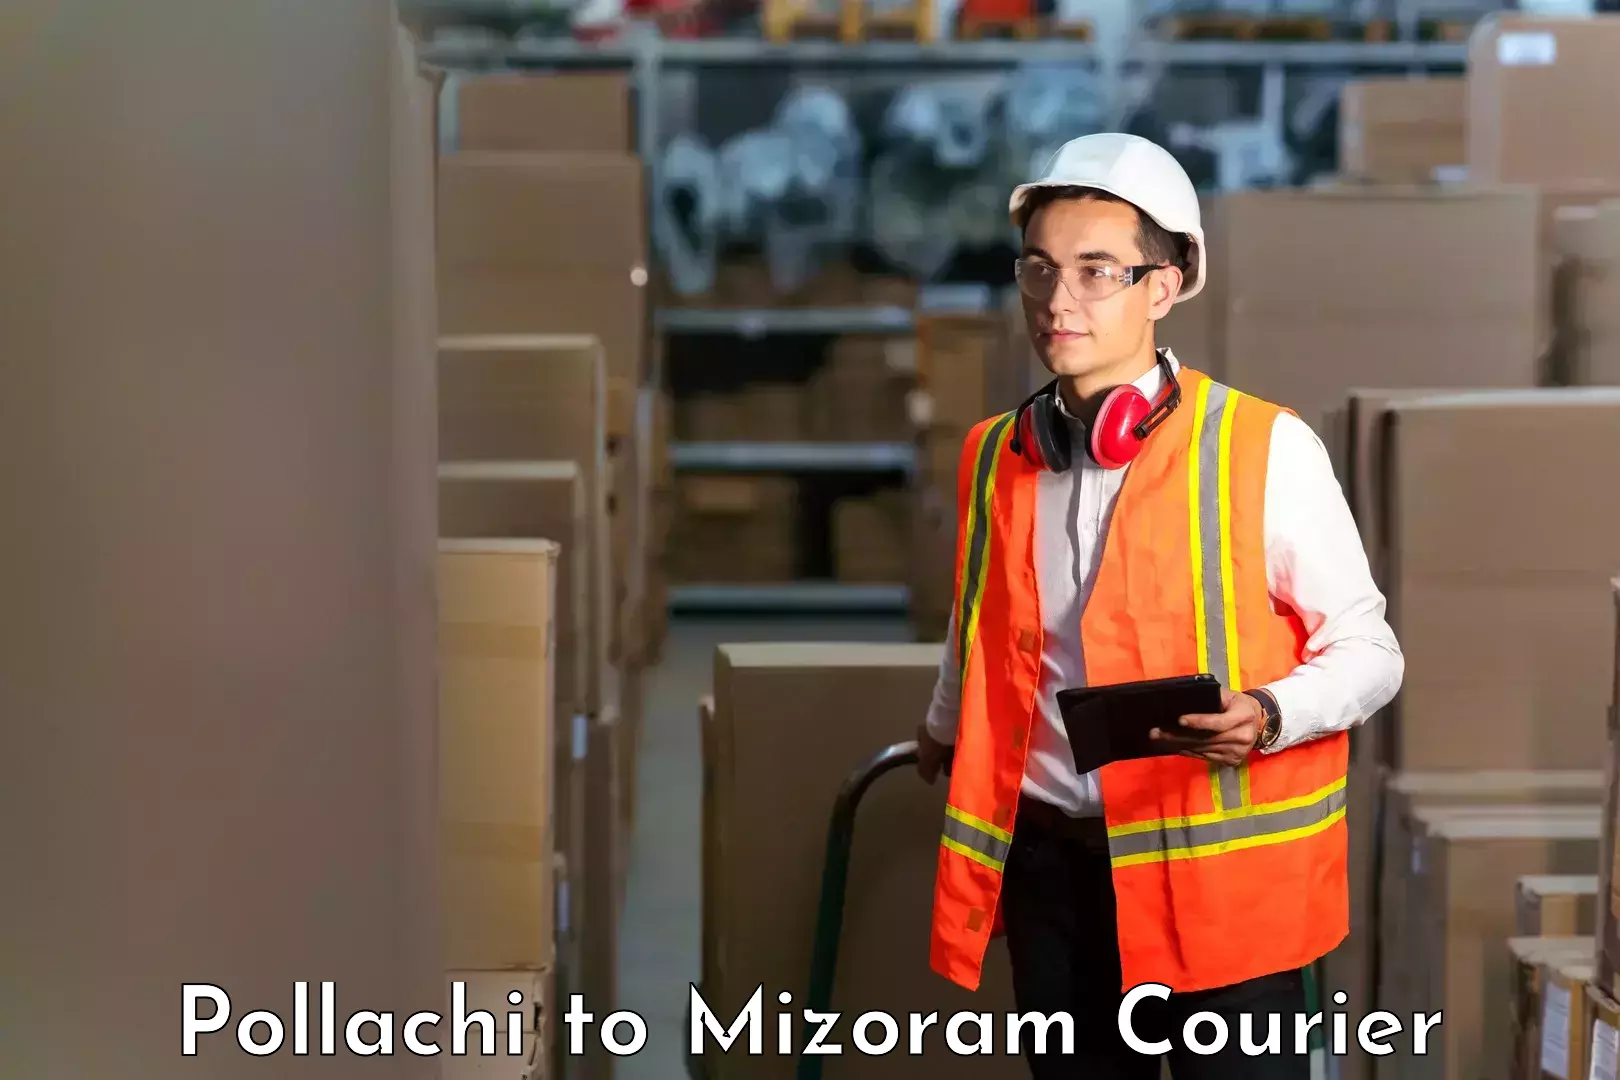 Courier service partnerships Pollachi to Aizawl